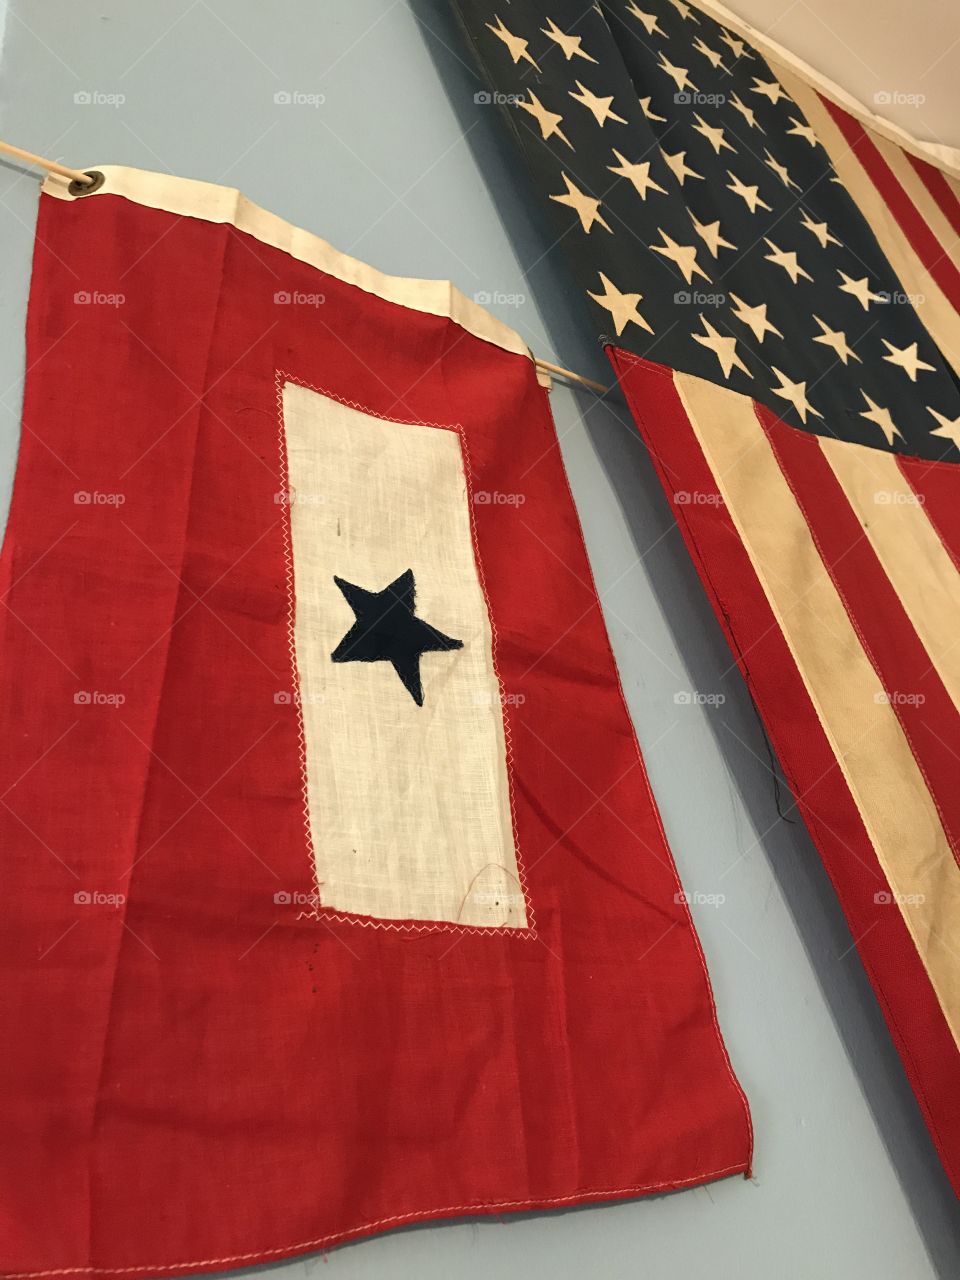 The service flag was authorized by the US department of defense during WWI for families to display when they had someone serving in the Armed Forces. The blue star represented hope. There is also one with a yellow star that represented sacrifice. Next to it hangs a 48 star flag.